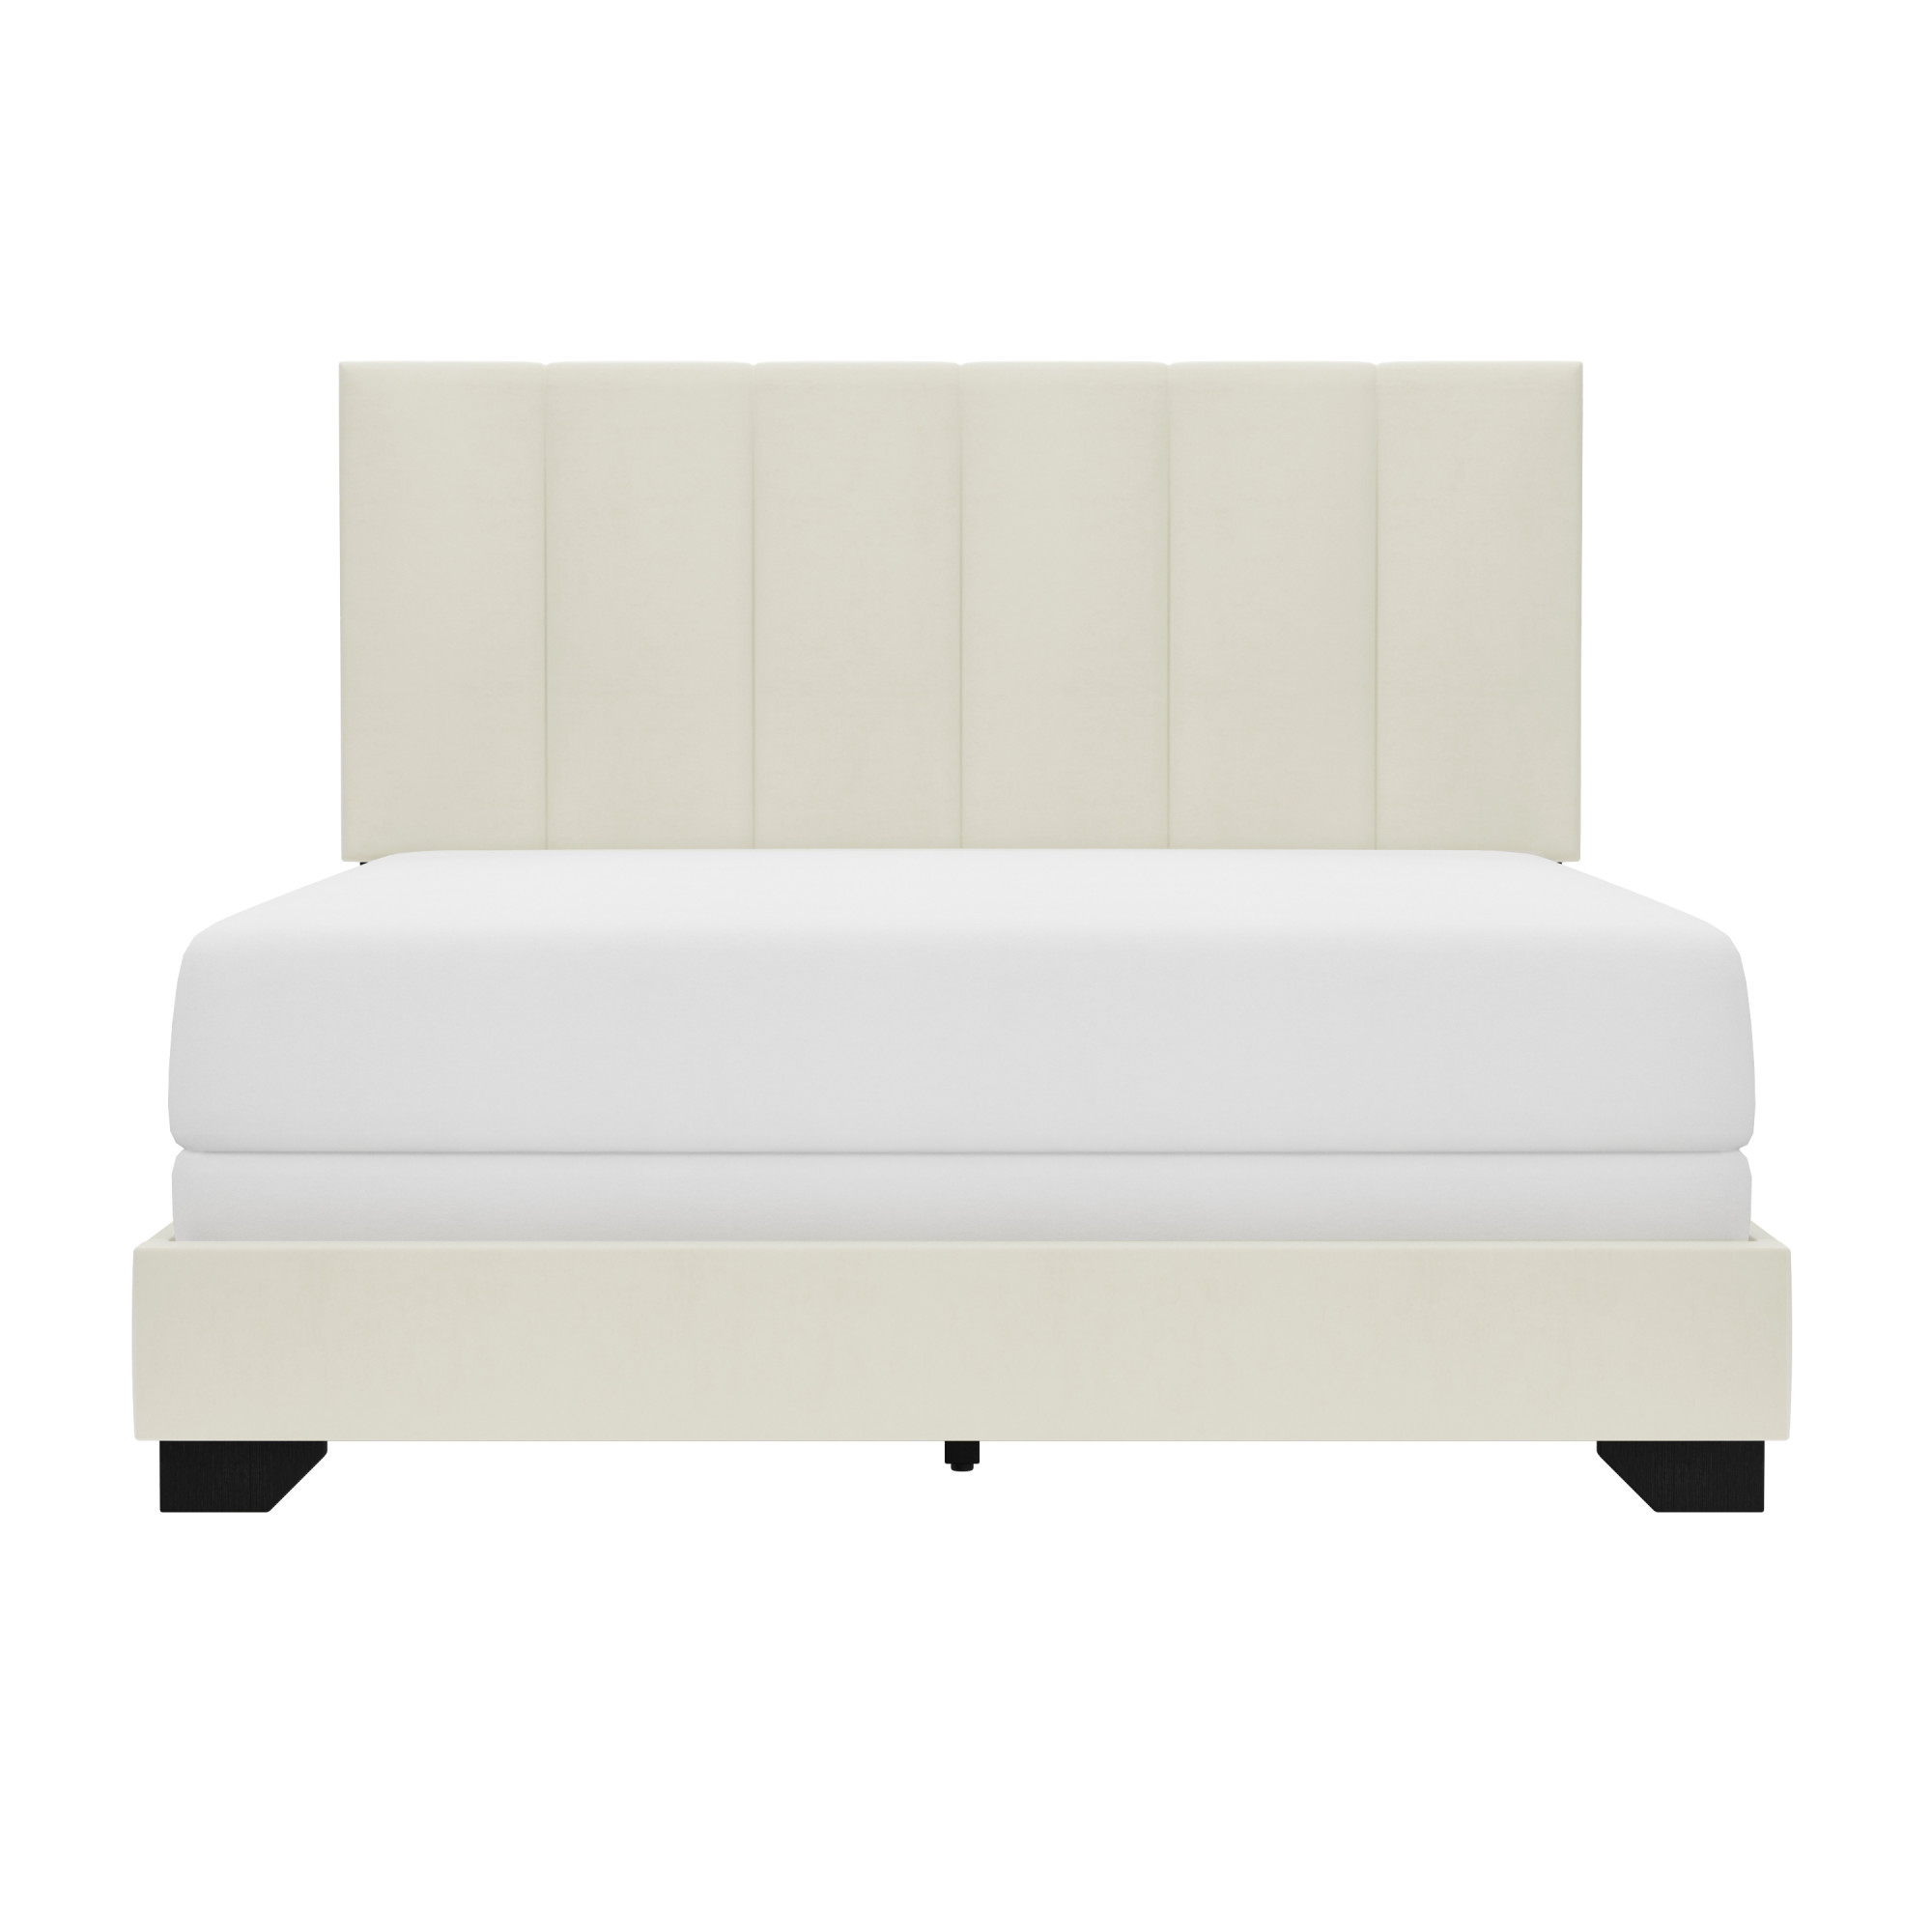 Reece Channel Stitched Upholstered Full Bed, Ivory, by Hillsdale Living Essentials - image 2 of 17